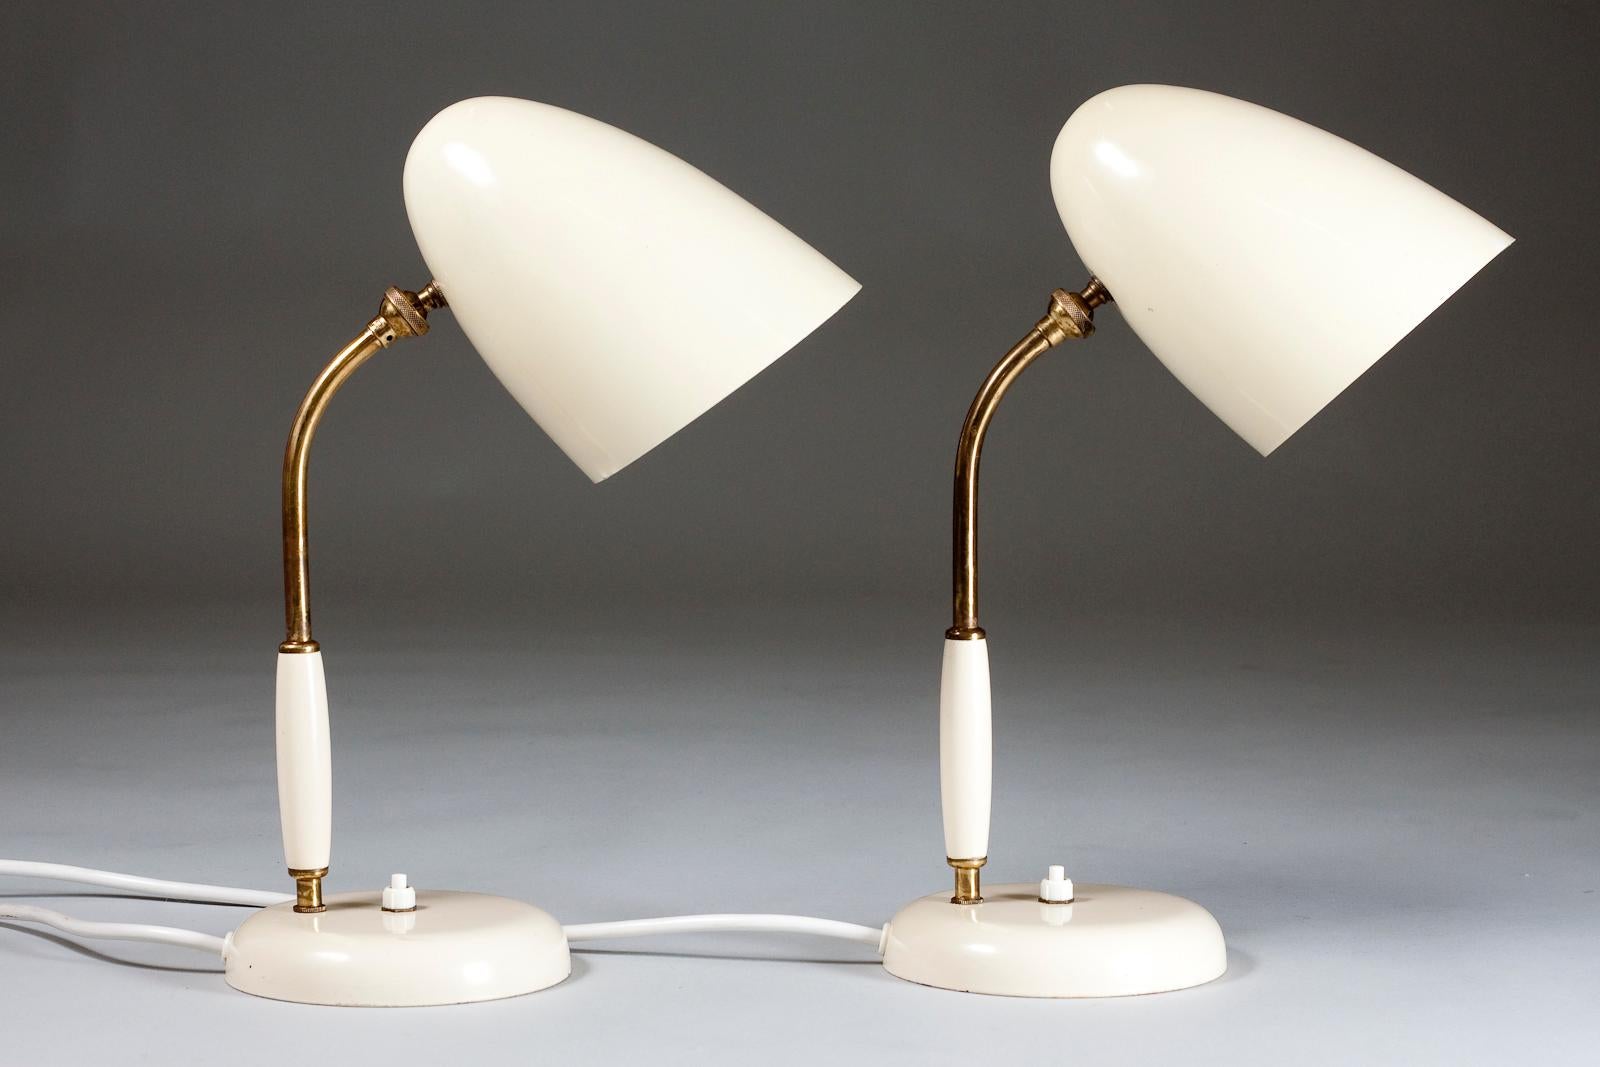 Scandinavian Modern Pair of Finnish White Mid-Century Modern Table Lamps by Stockmann Oy, Finland